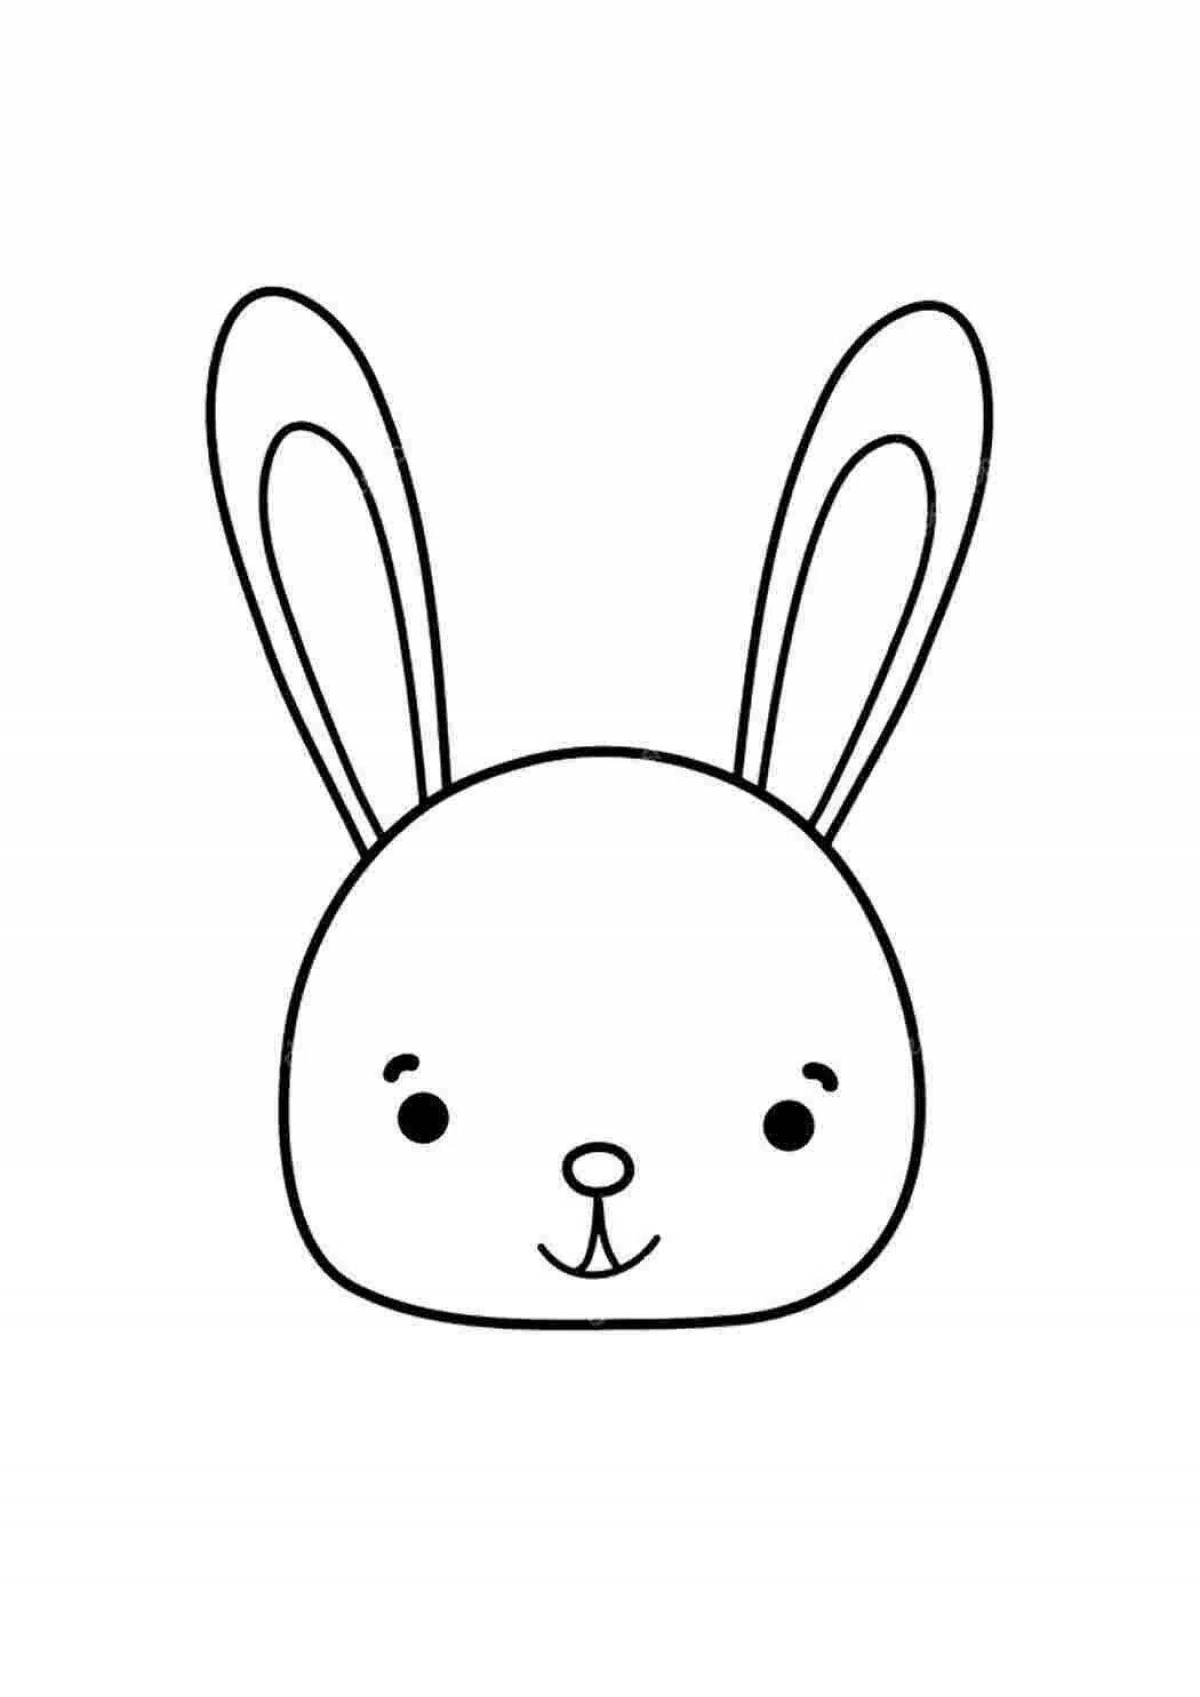 Naughty rabbit coloring page